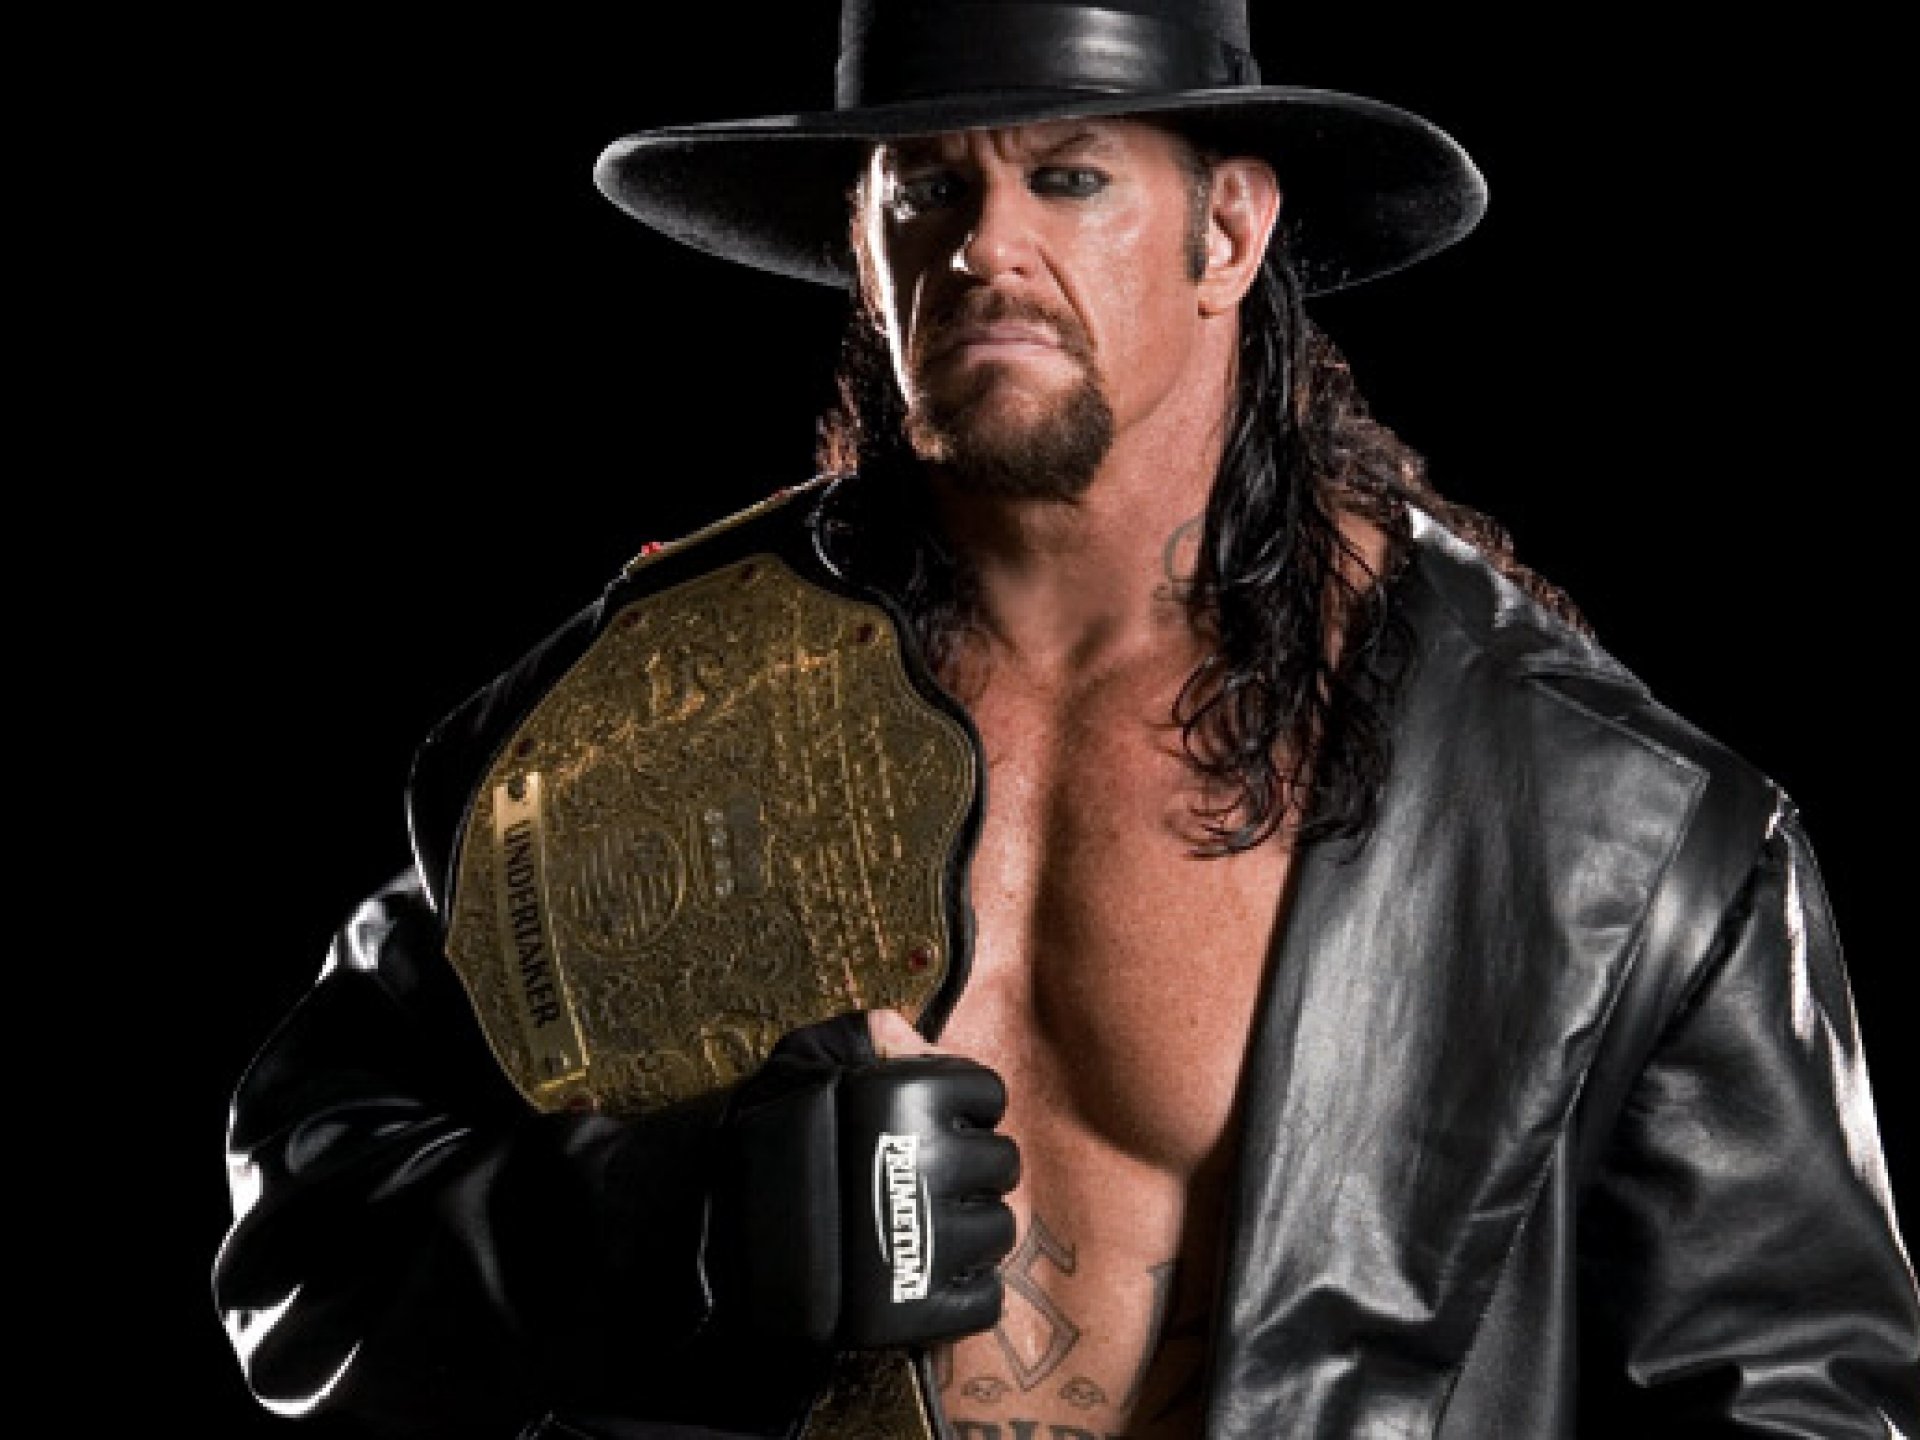 Happy Birthday to The Undertaker, who turns 51 today! 